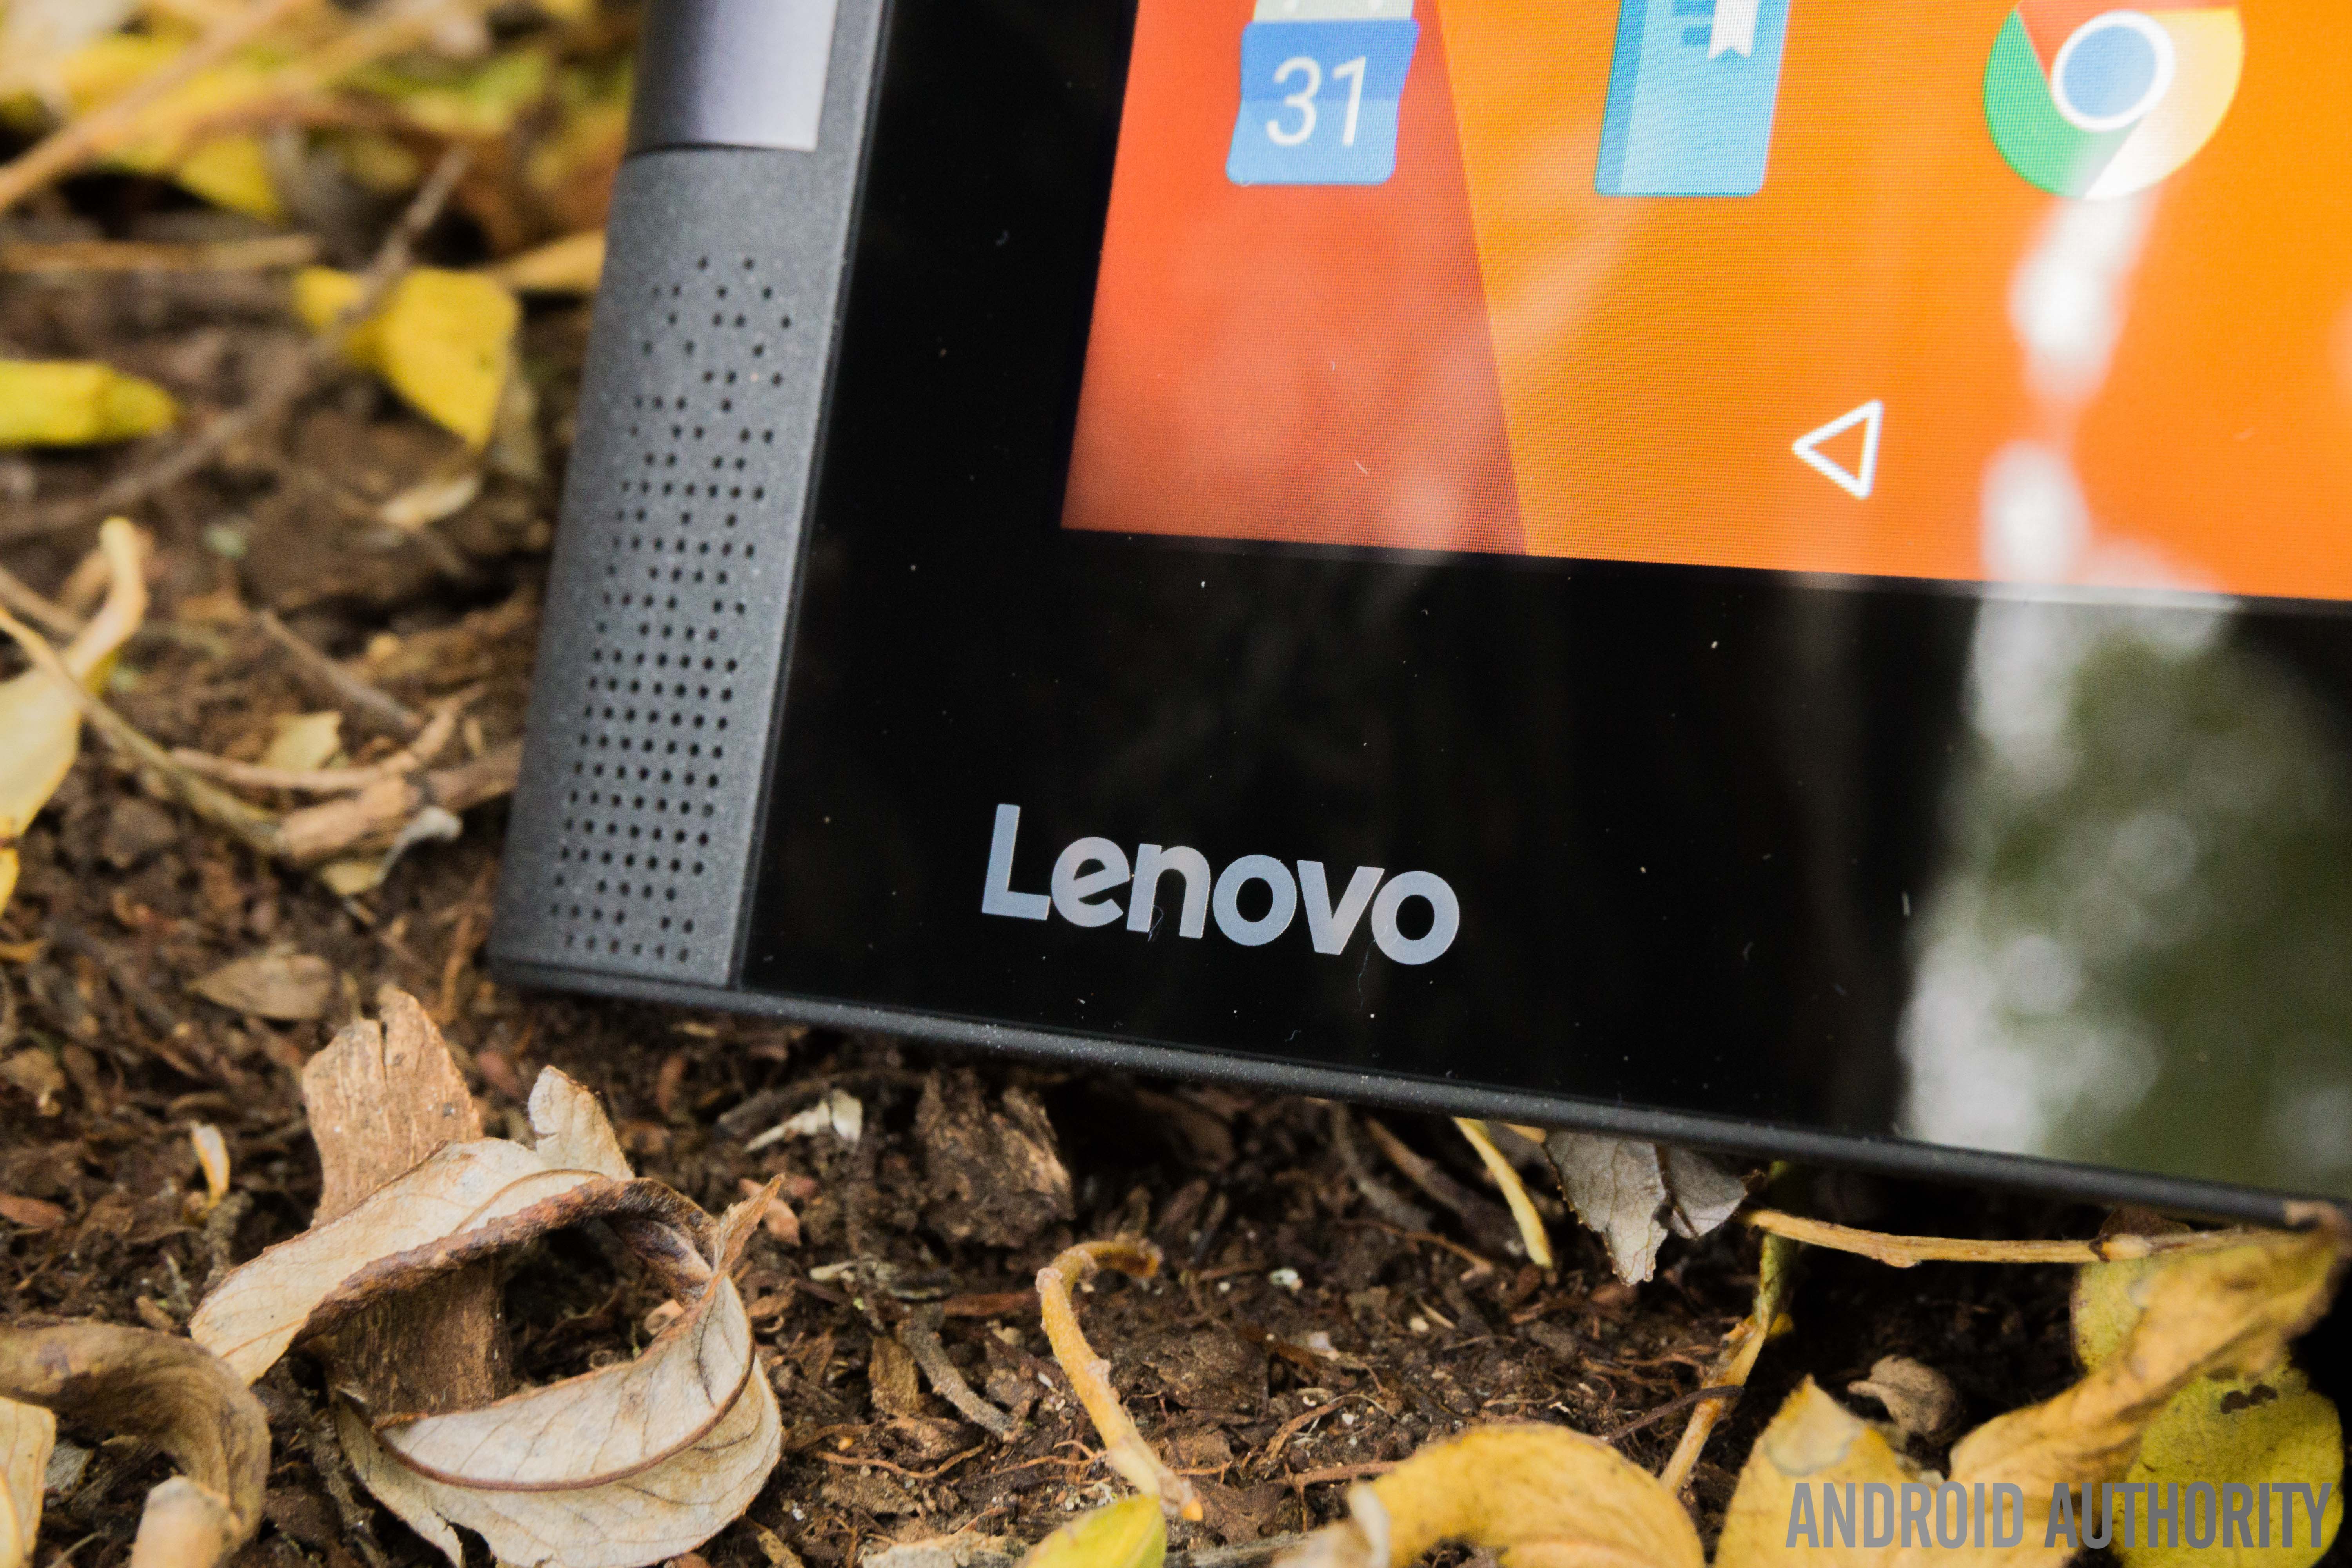 Lenovo Yoga Tab 3 8-inch review - Android Authority